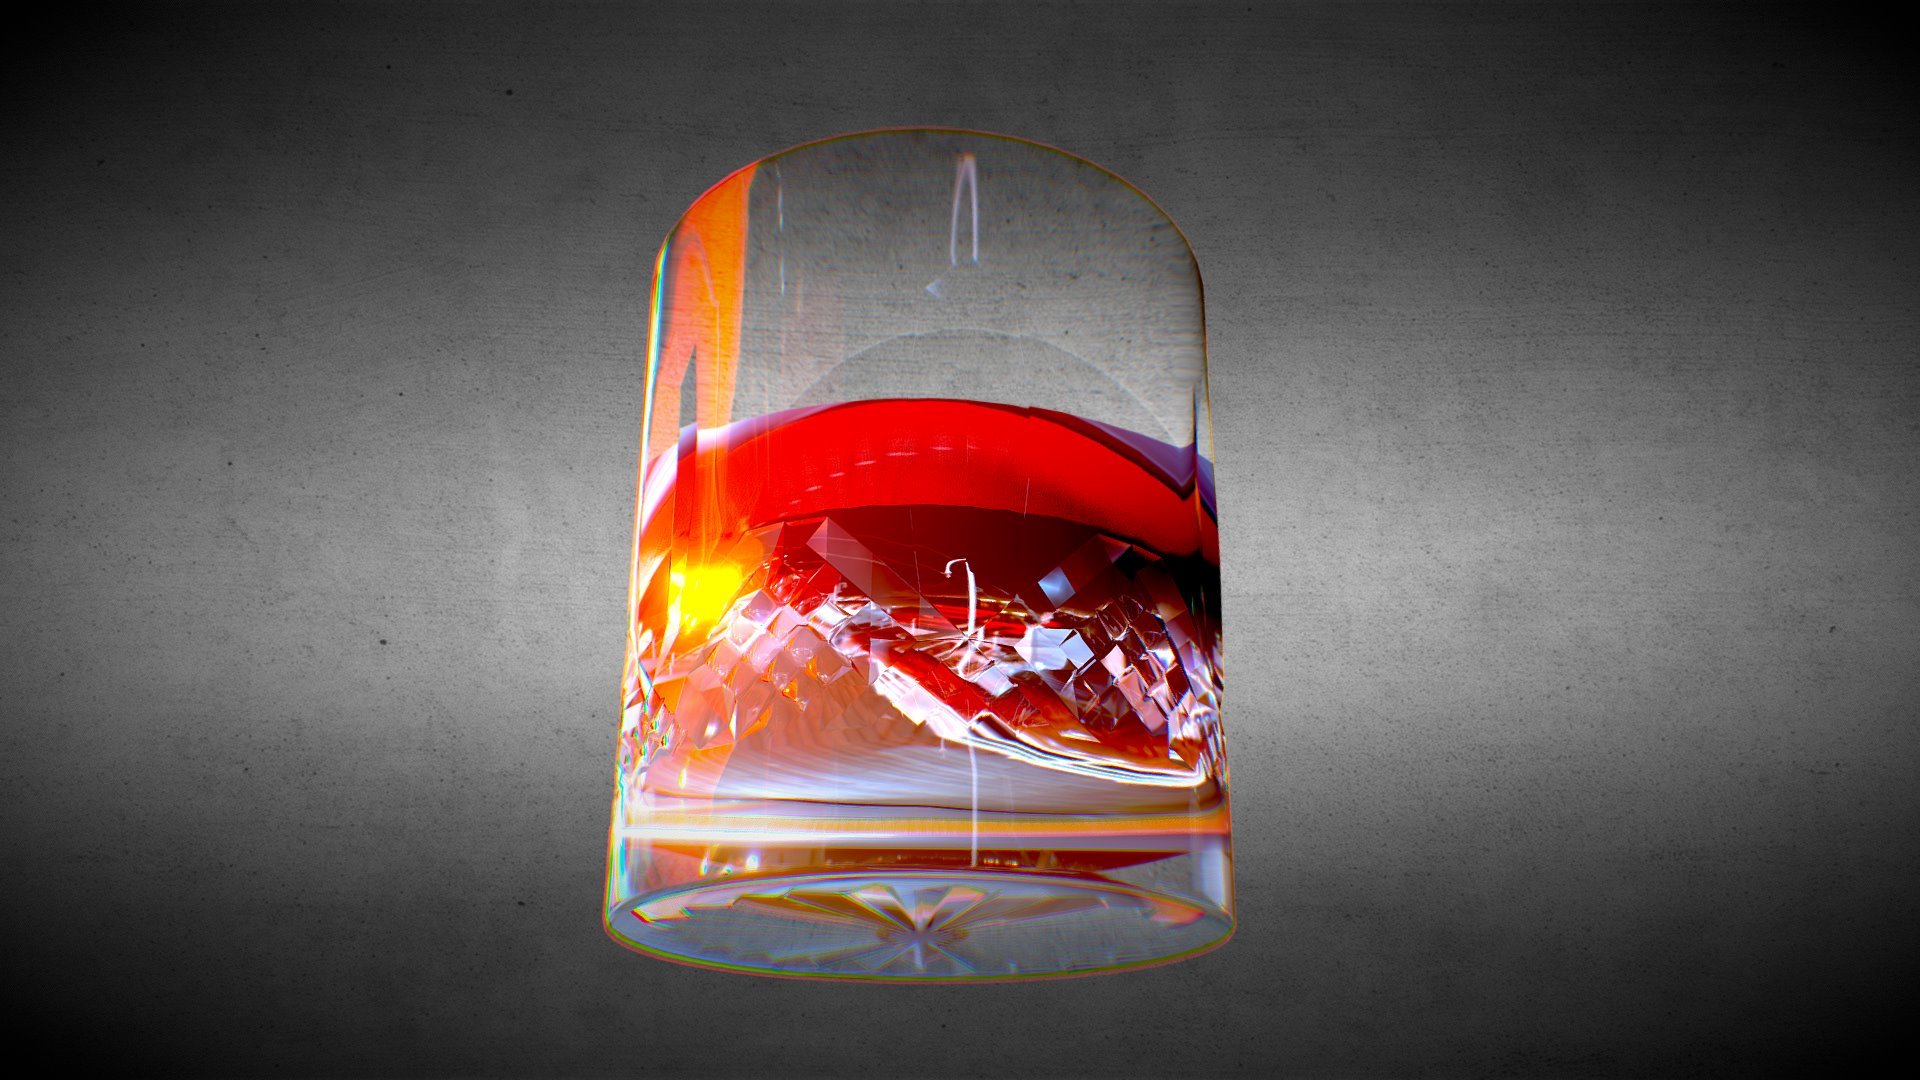 Whisky in cut glass with ice. Complete with finger smudges.

Modelled in blender 2.79 3d model